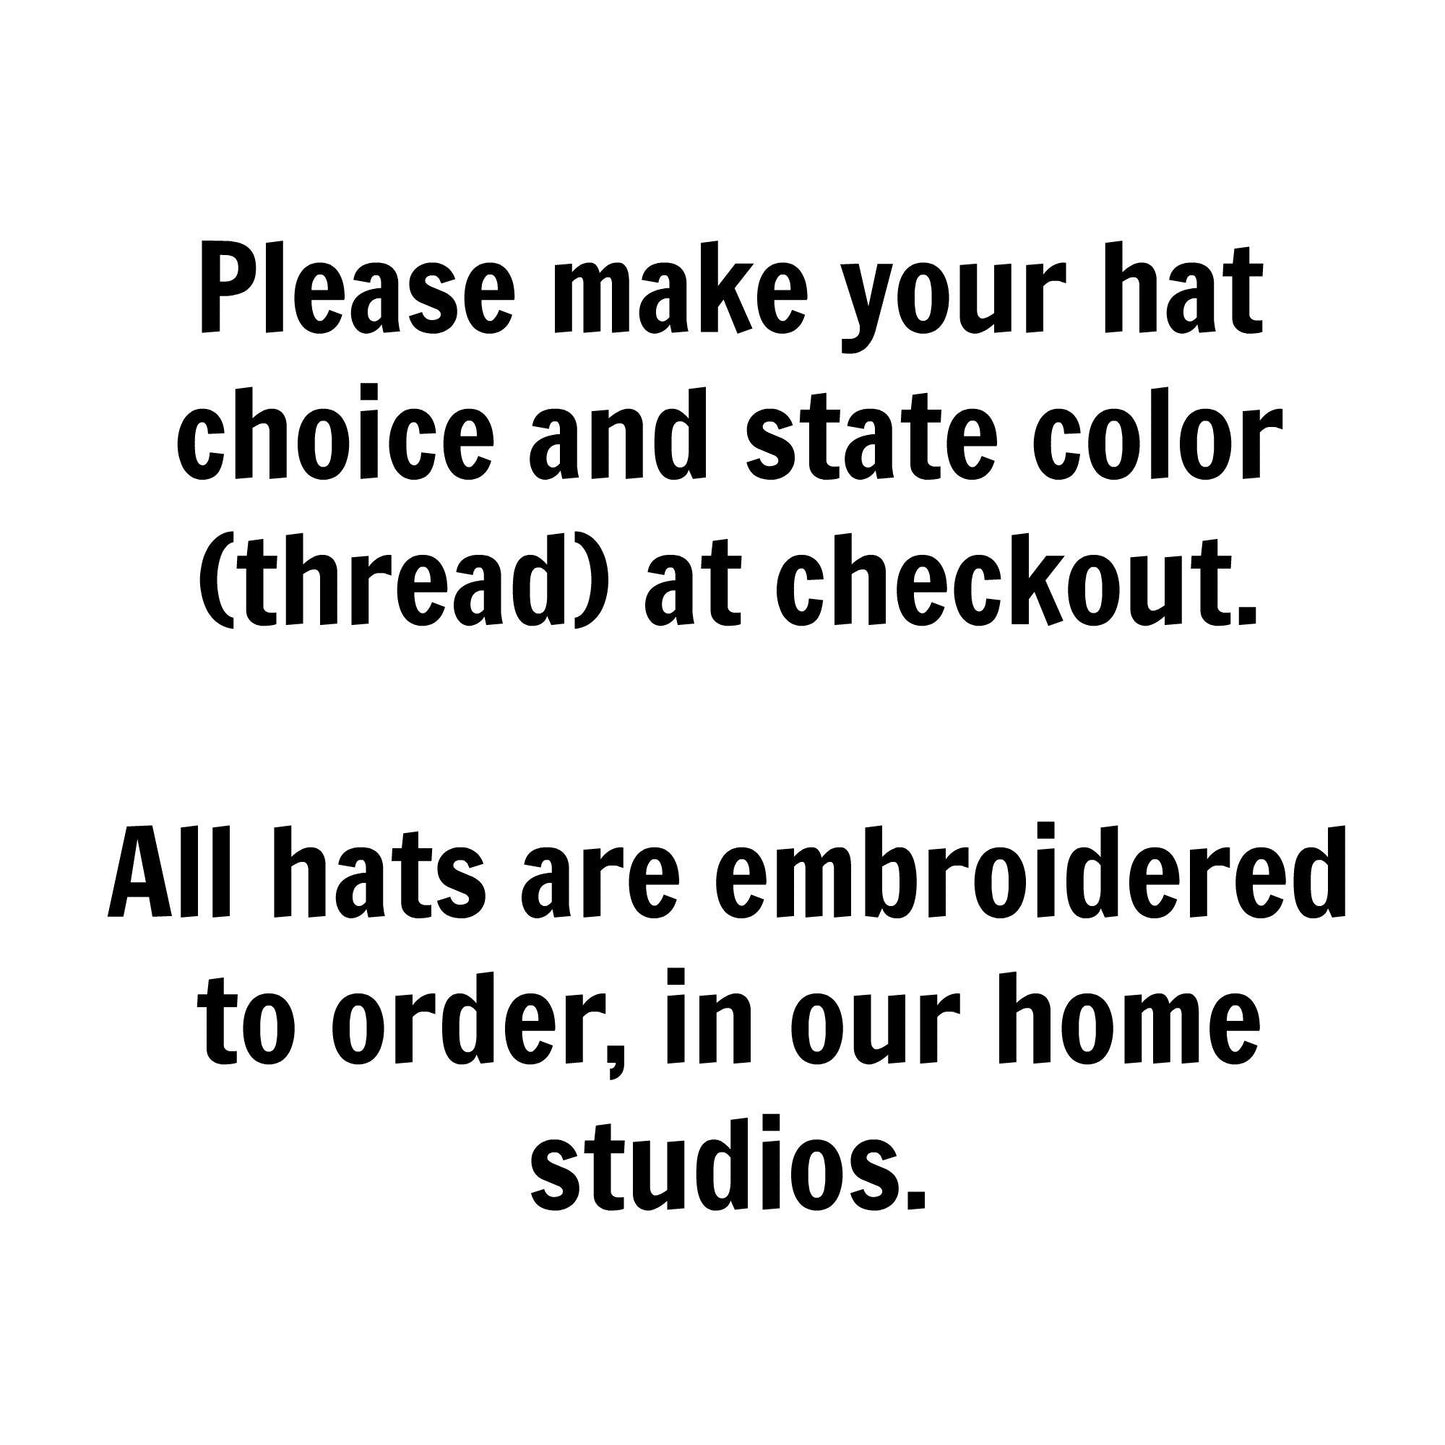 Missouri Hat - Distressed Snapback Trucker Hat - Missouri State Outline - Many Colors Available